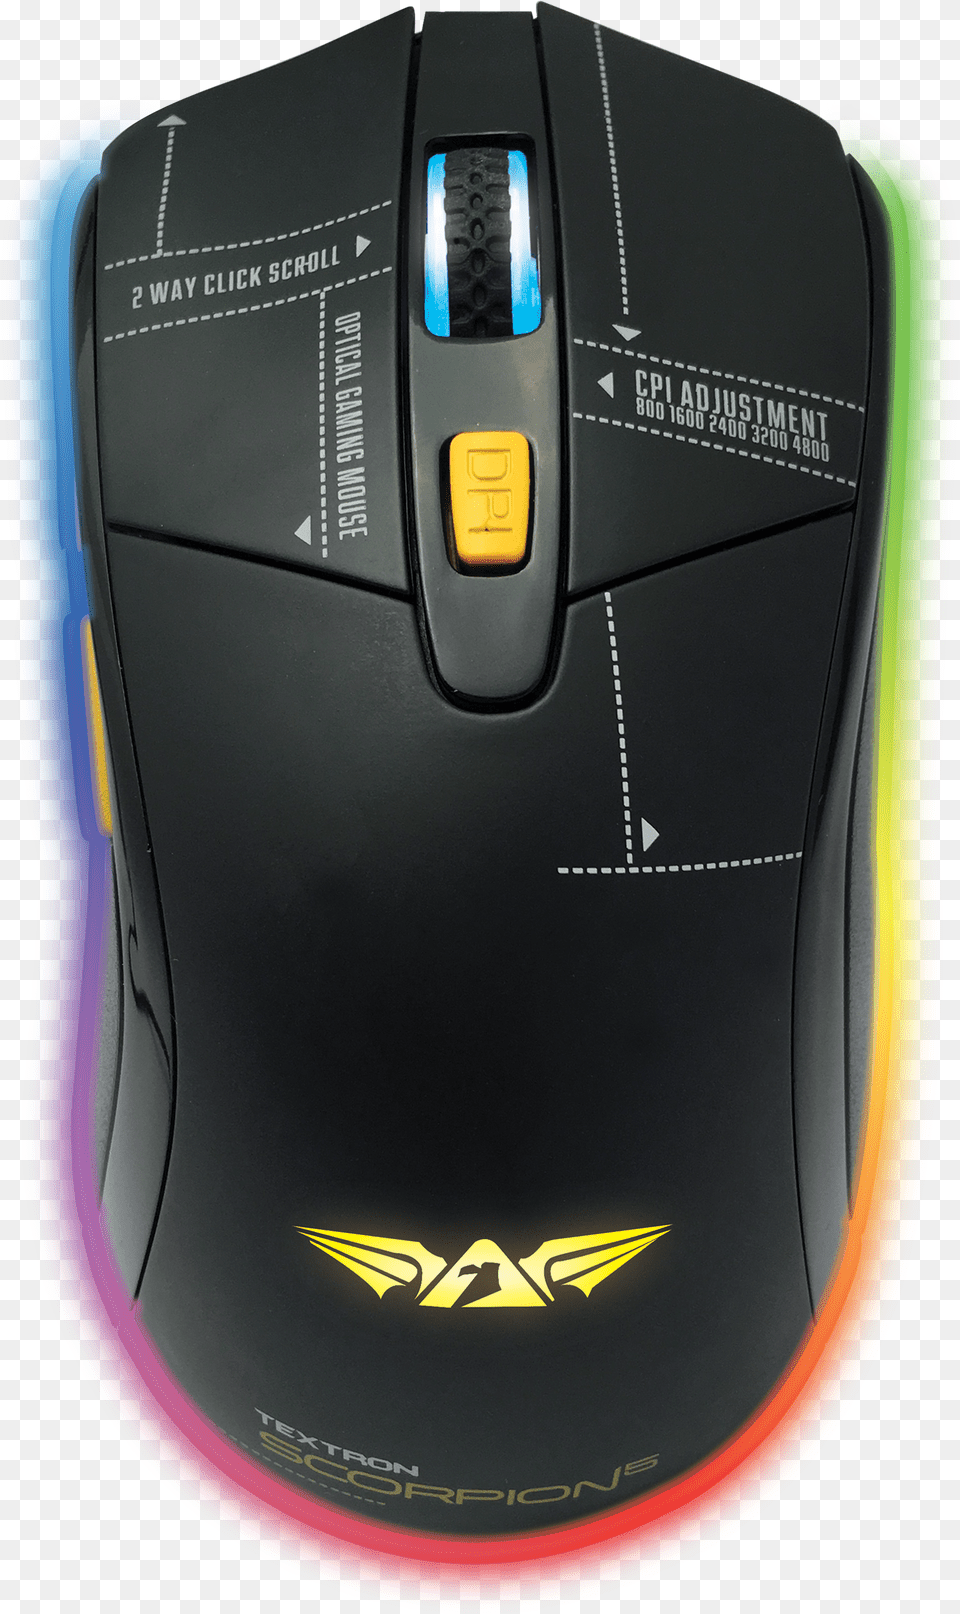 The Scorpion 5 Features 5 Macro Able Buttons On The Armaggeddon Textron Scorpion Free Transparent Png